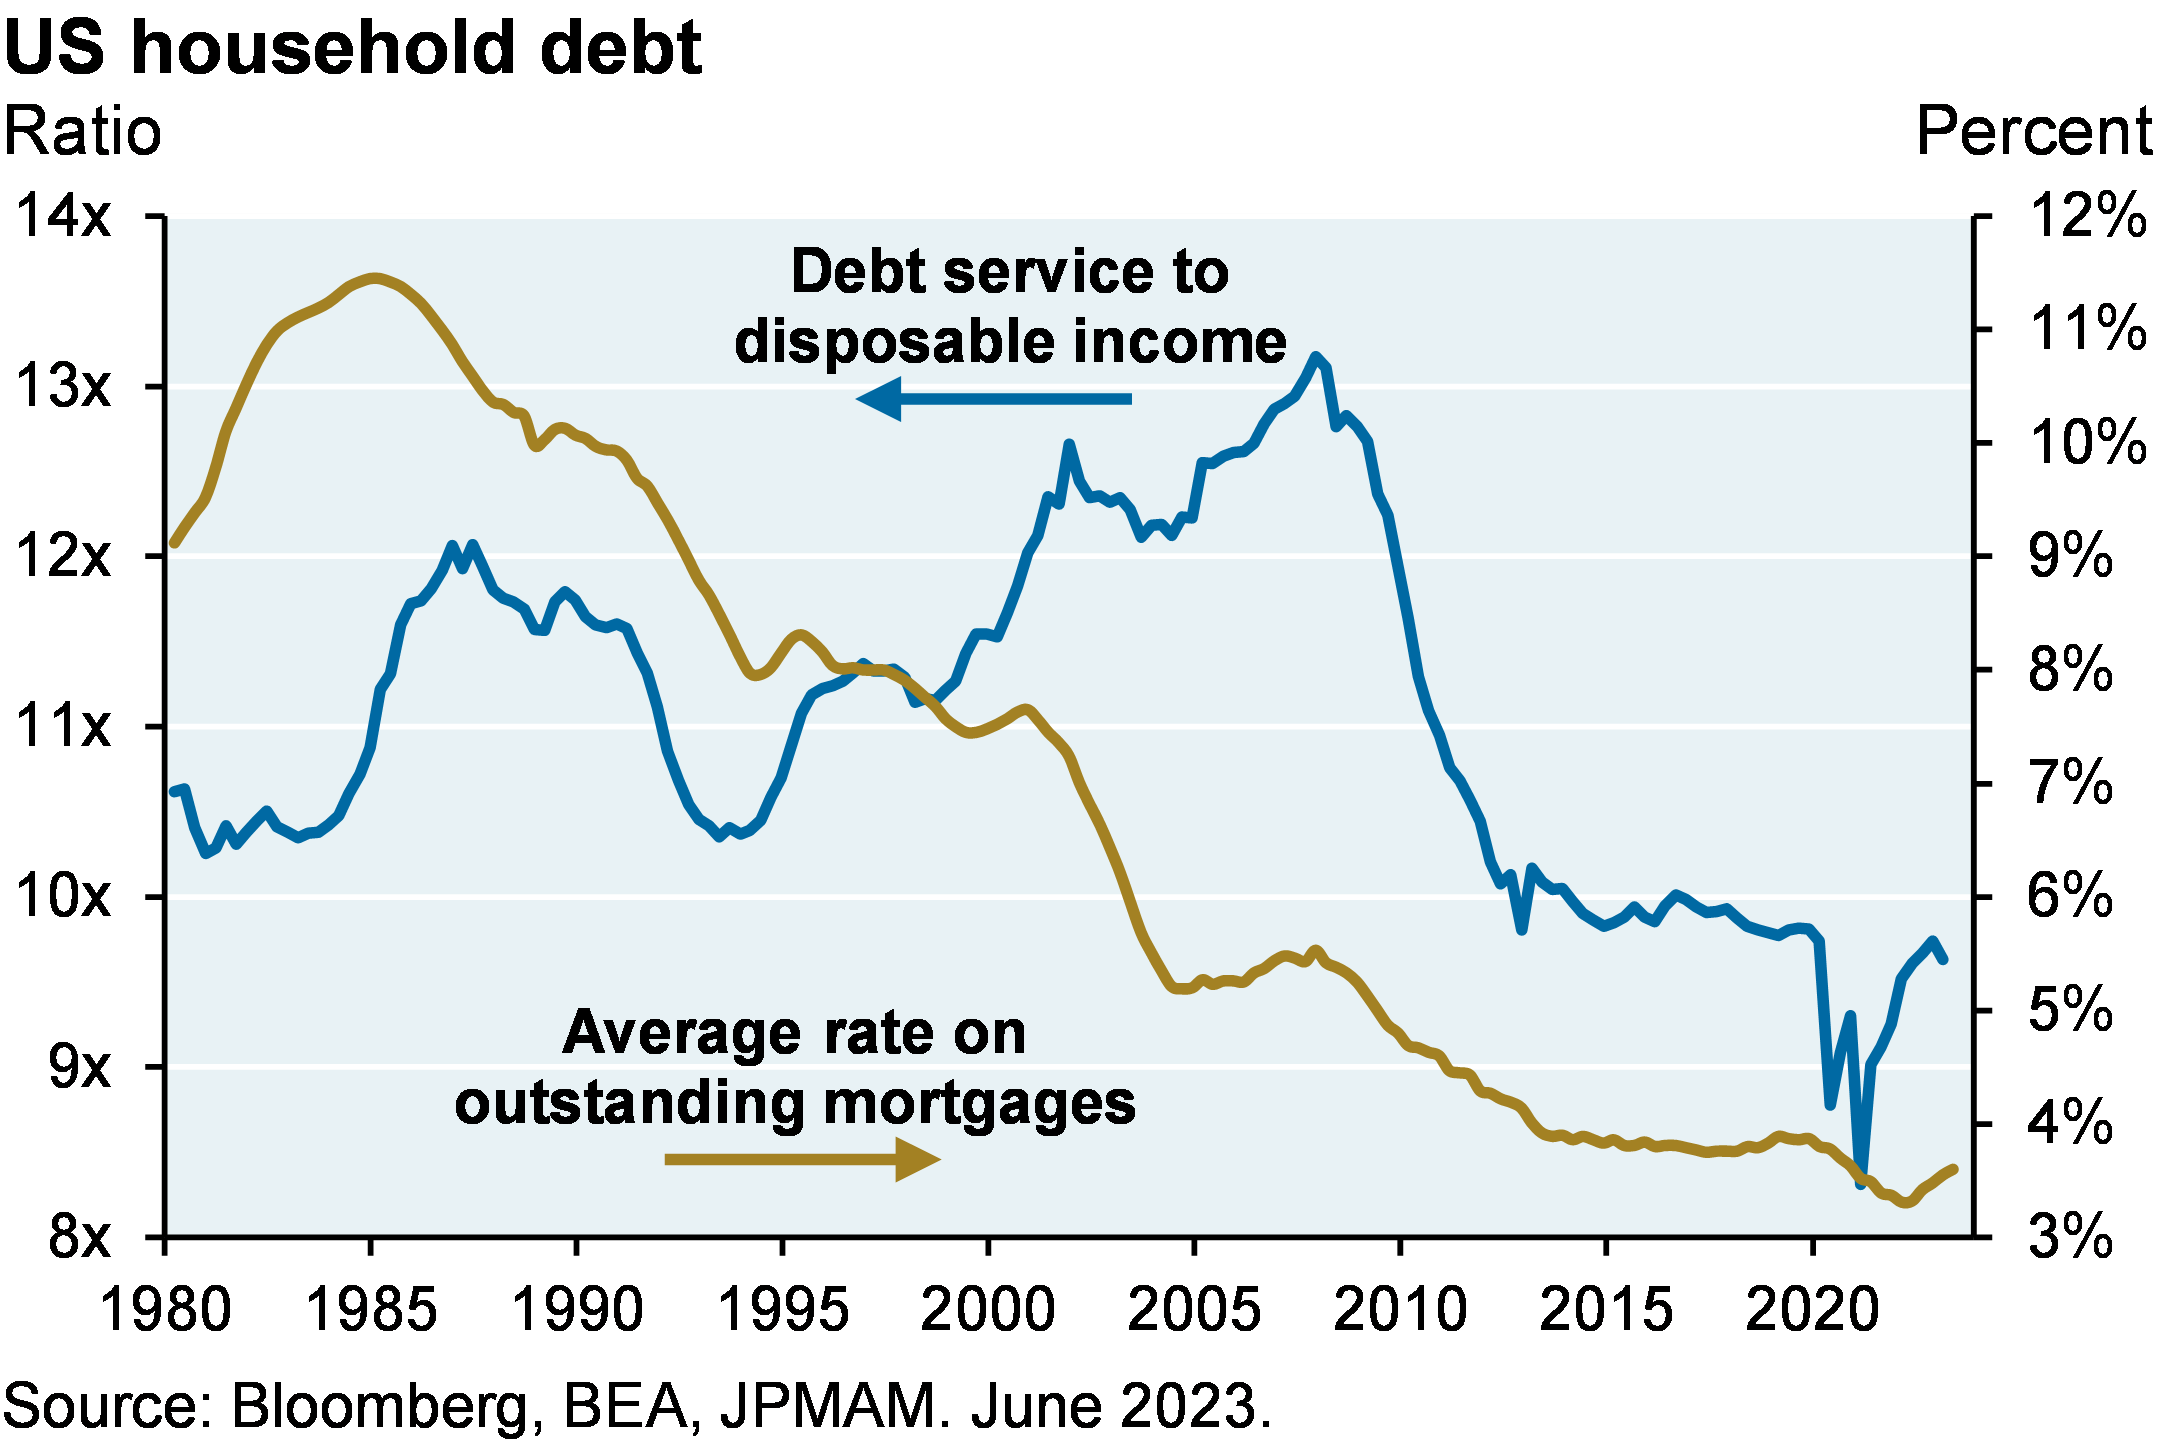 Line chart shows both the household debt service to disposable income and average rate on outstanding mortgages since 1980. The line chart shows that debt service costs are incredibly low, one reason being the average coupon on outstanding residential mortgages is ~3.5%. 